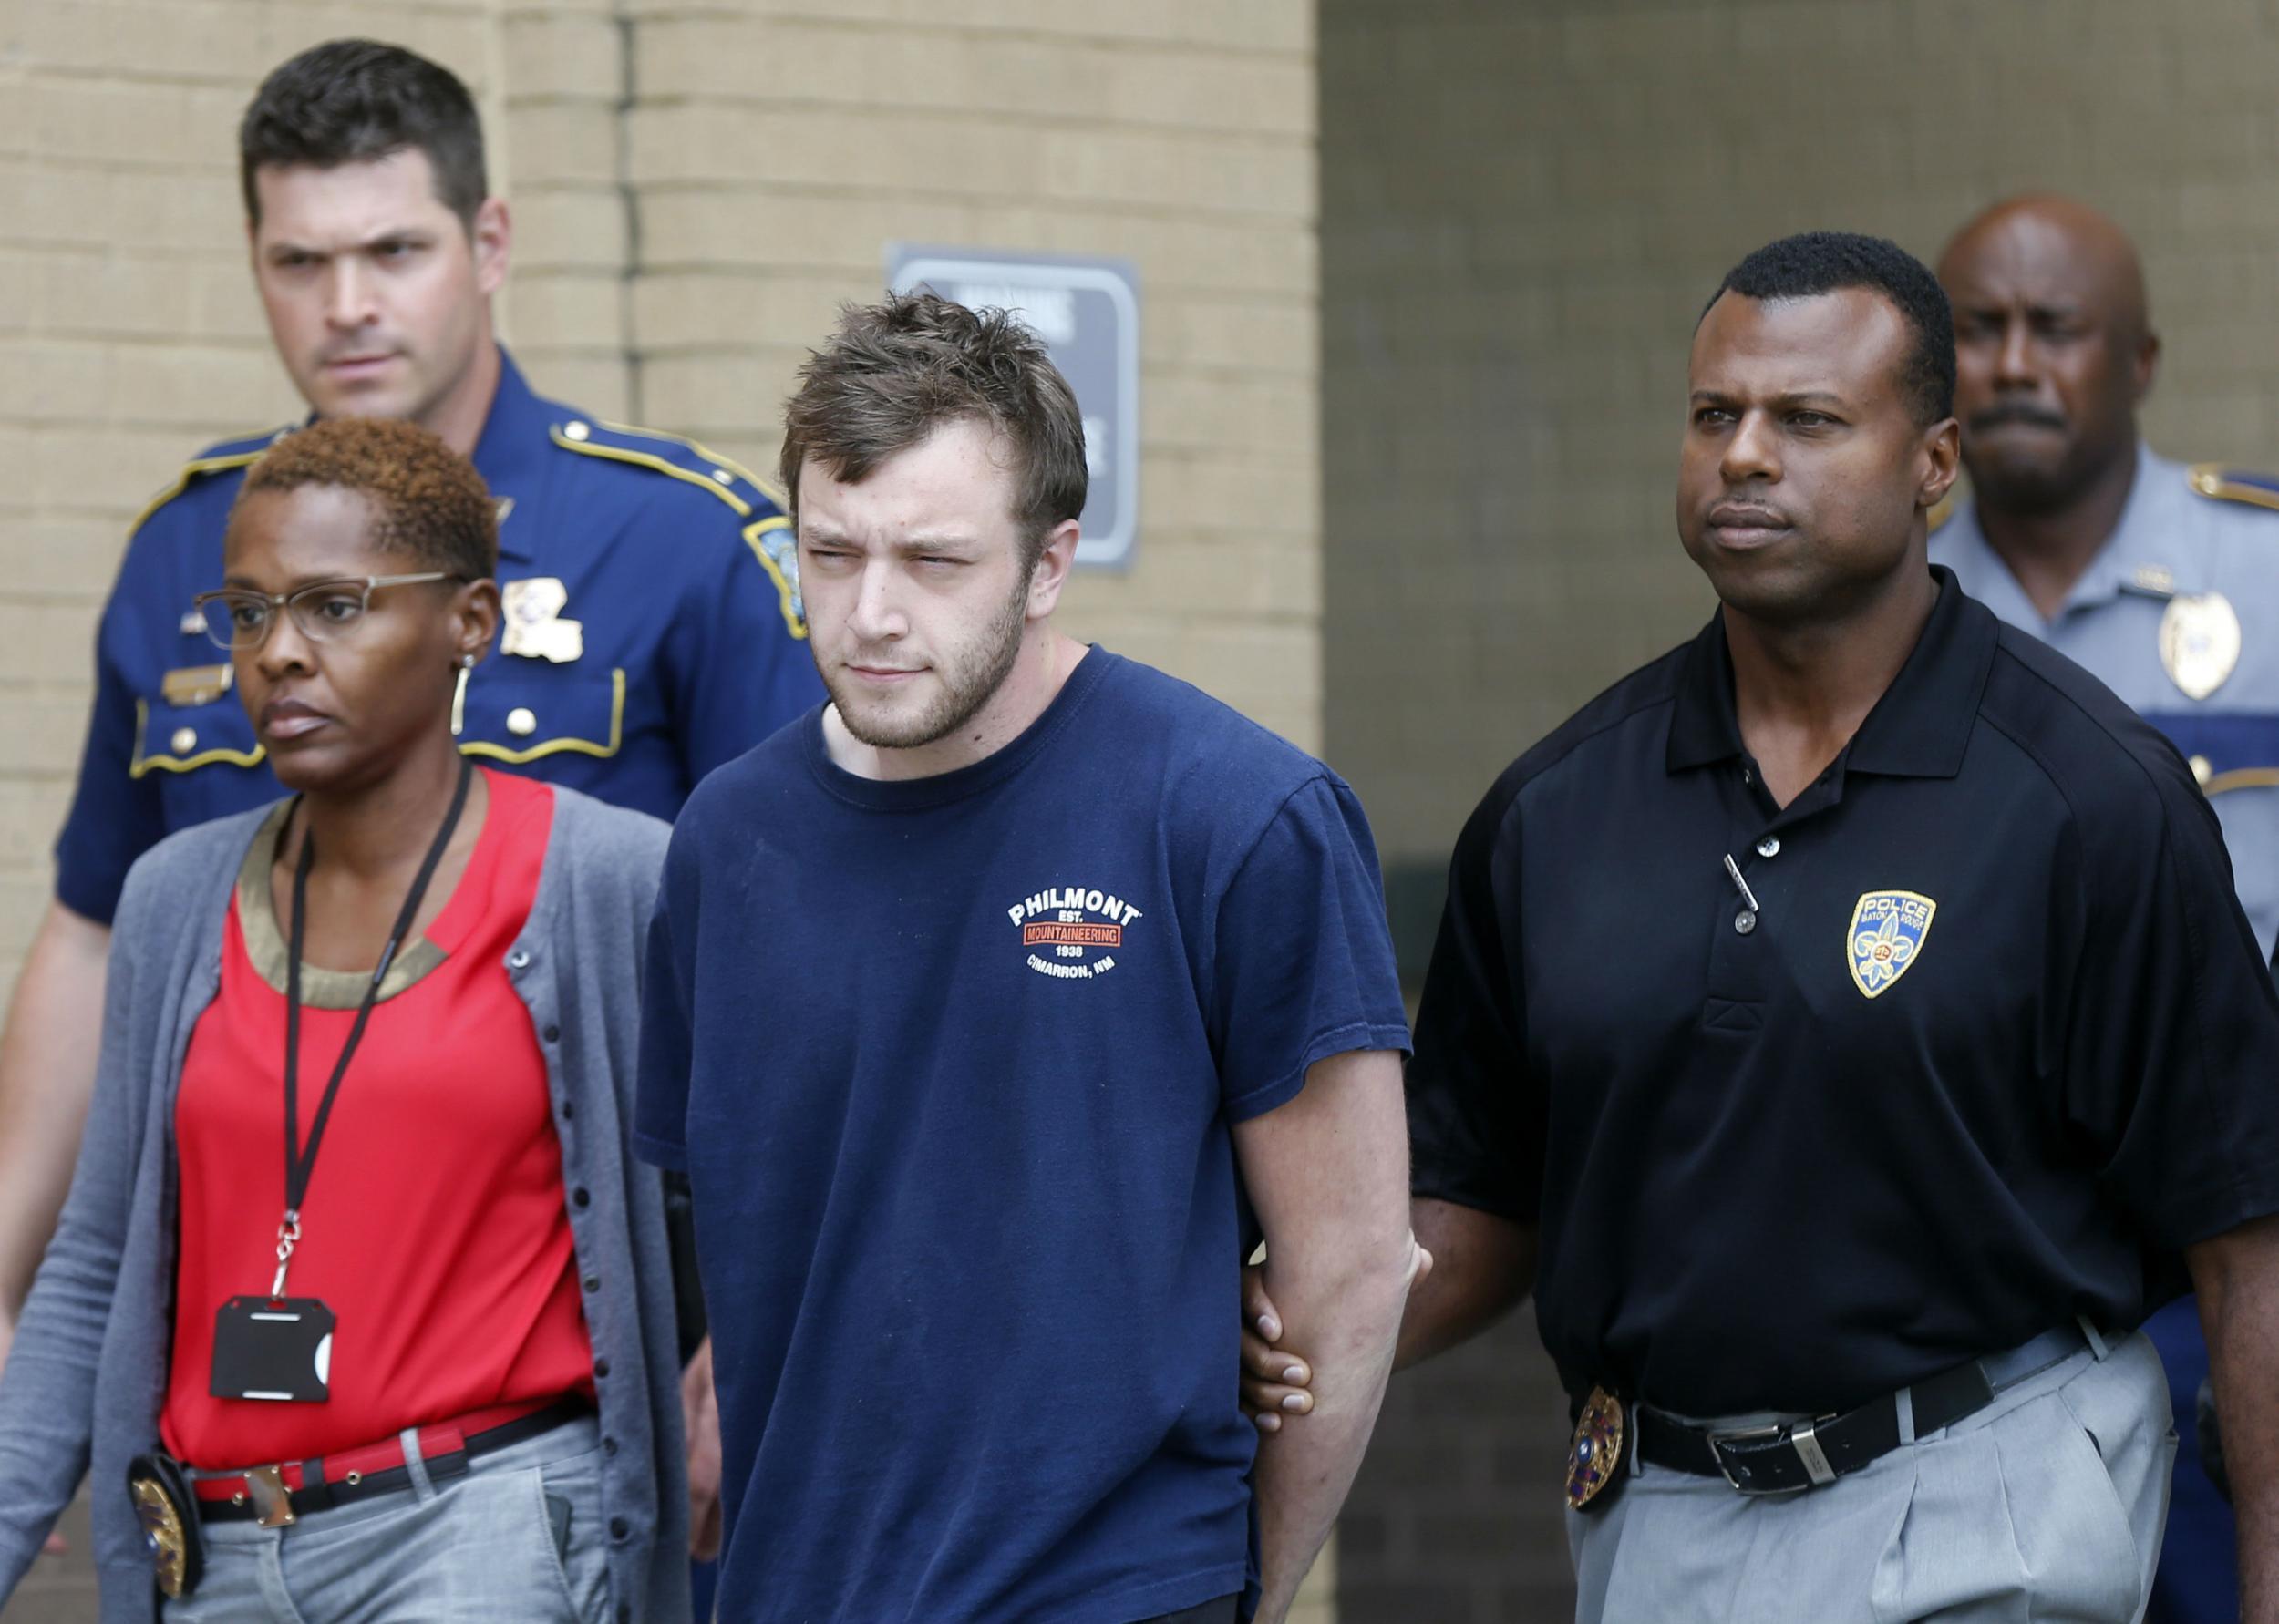 White Louisiana man to be charged with murder of two black men in &apos;possible hate crime&apos;